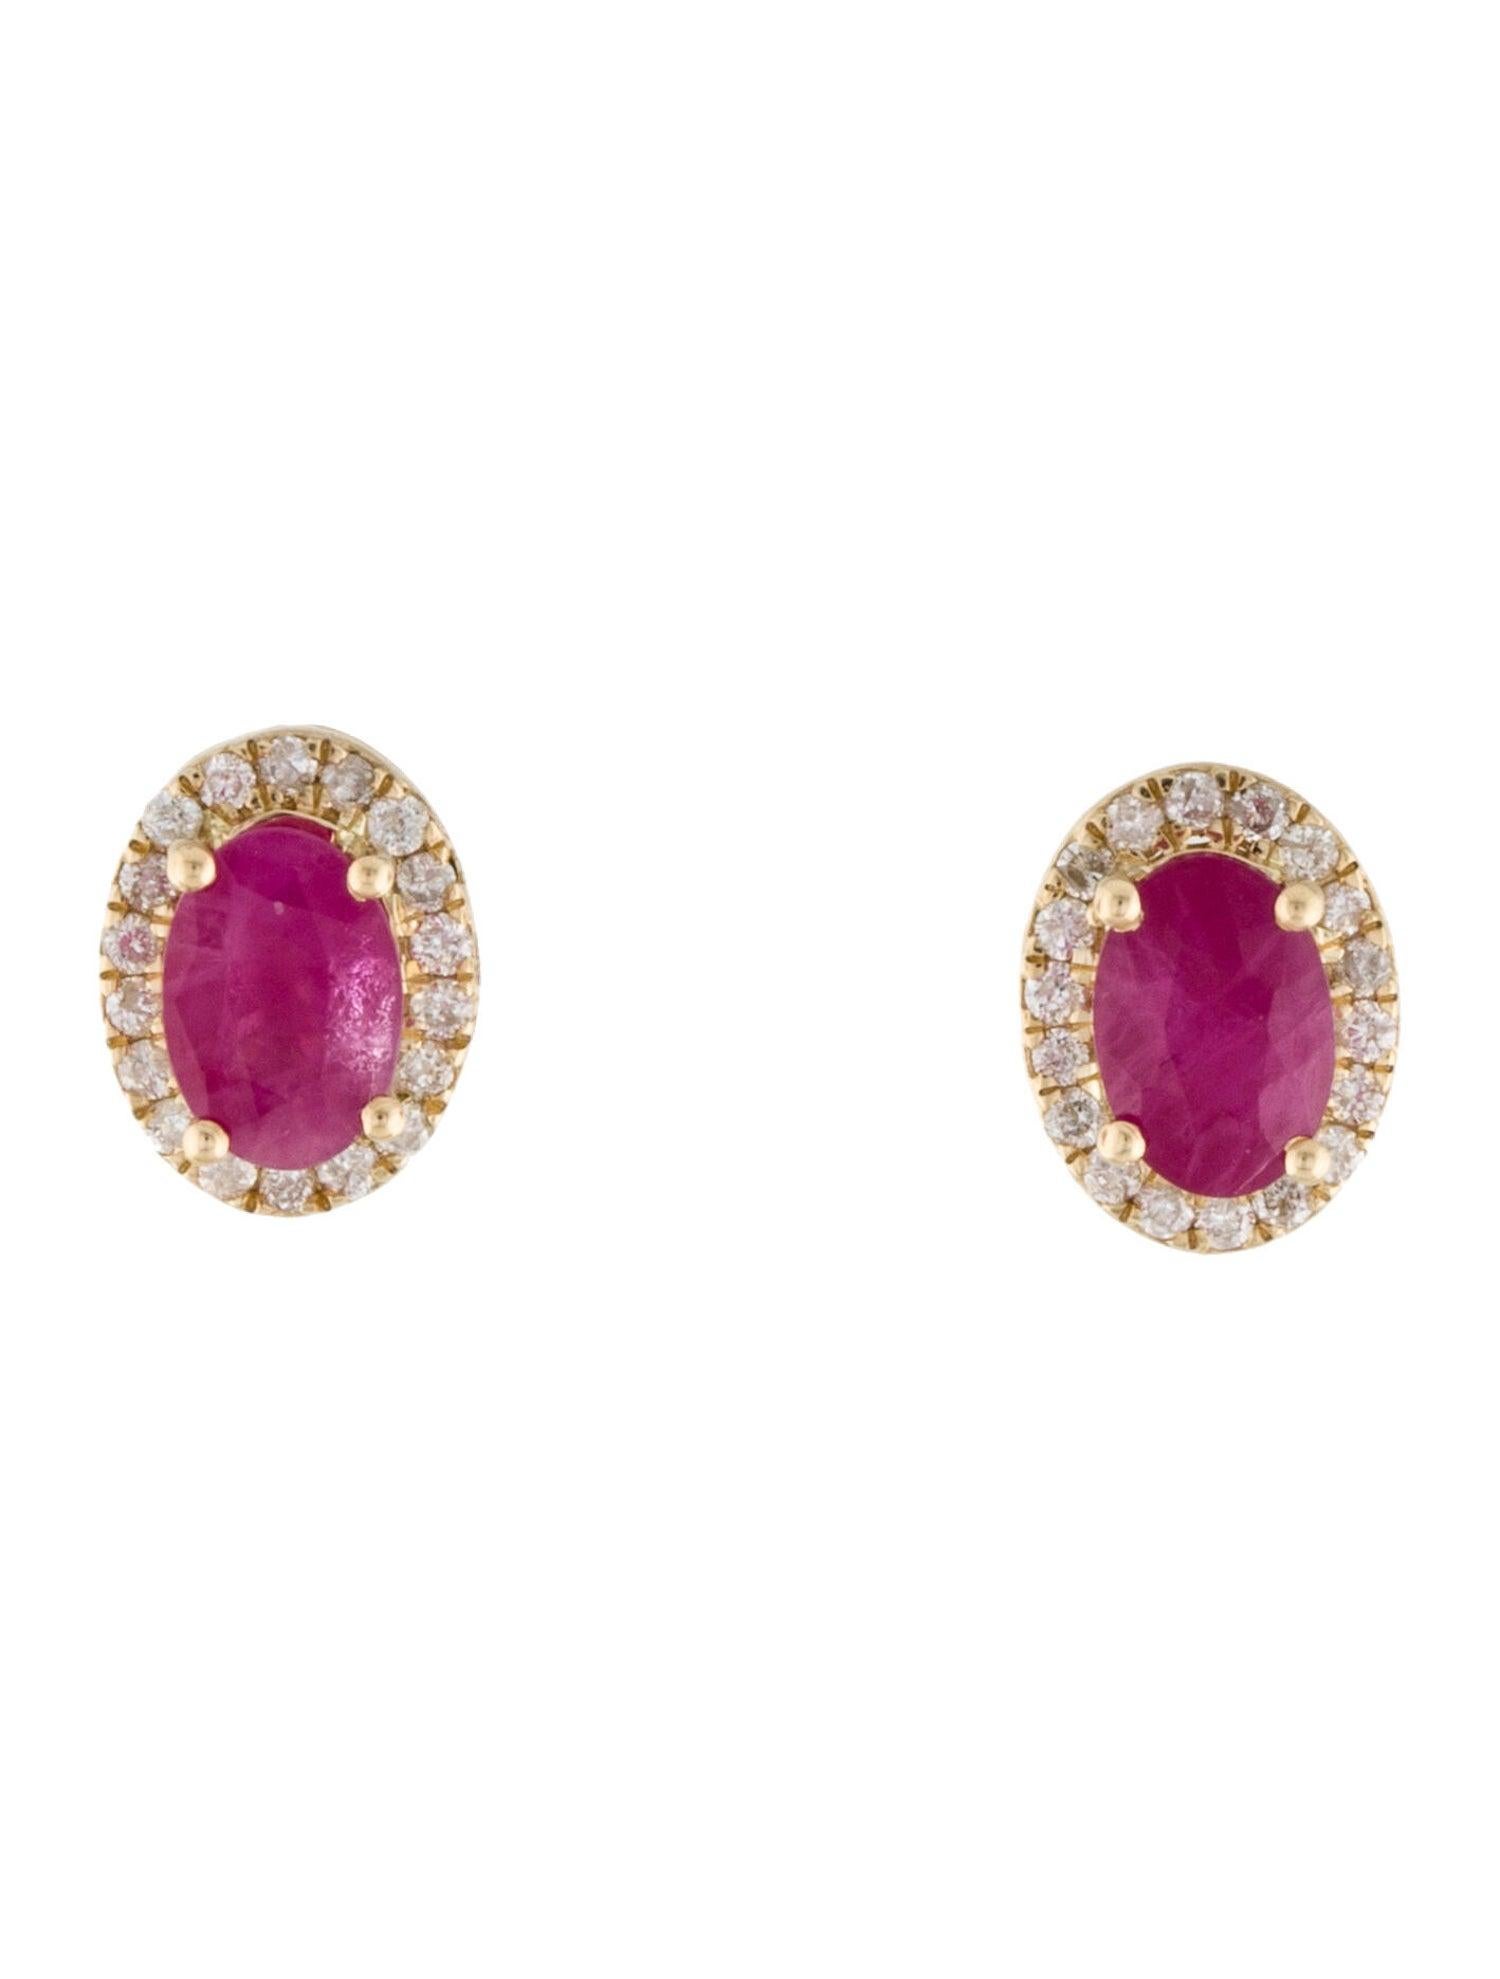 Embrace the fiery allure of passion with our exquisite Blooms of Passion Ruby and Diamond Earrings. These resplendent earrings are a testament to the enduring beauty of nature, artfully combining the fiery red hue of rubies with the timeless